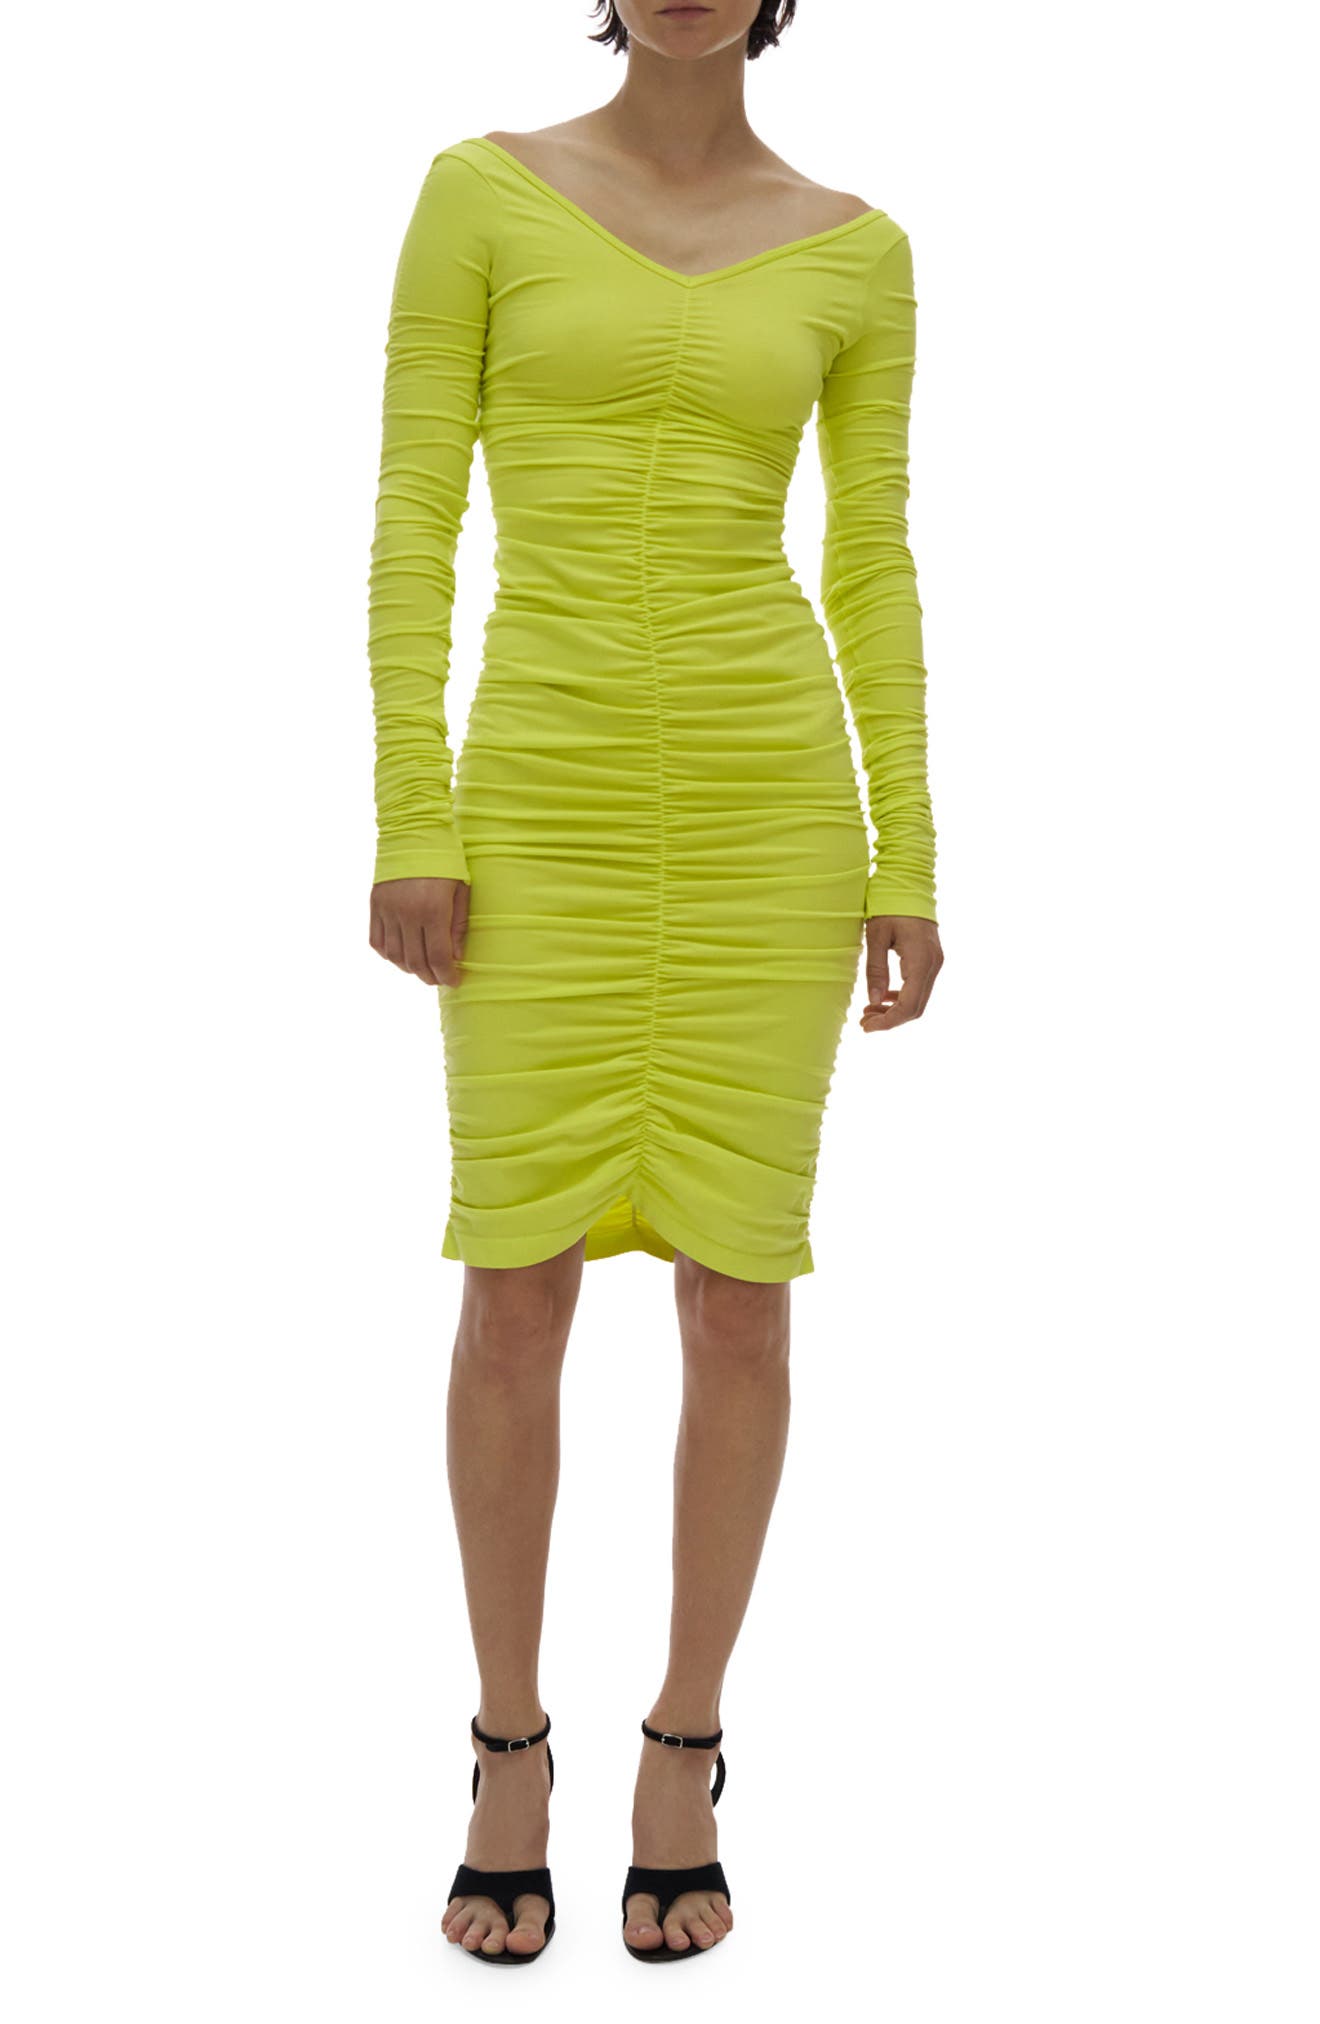 Helmut Lang Ruched Long Sleeve Body-Con Dress in Acid Lime at Nordstrom